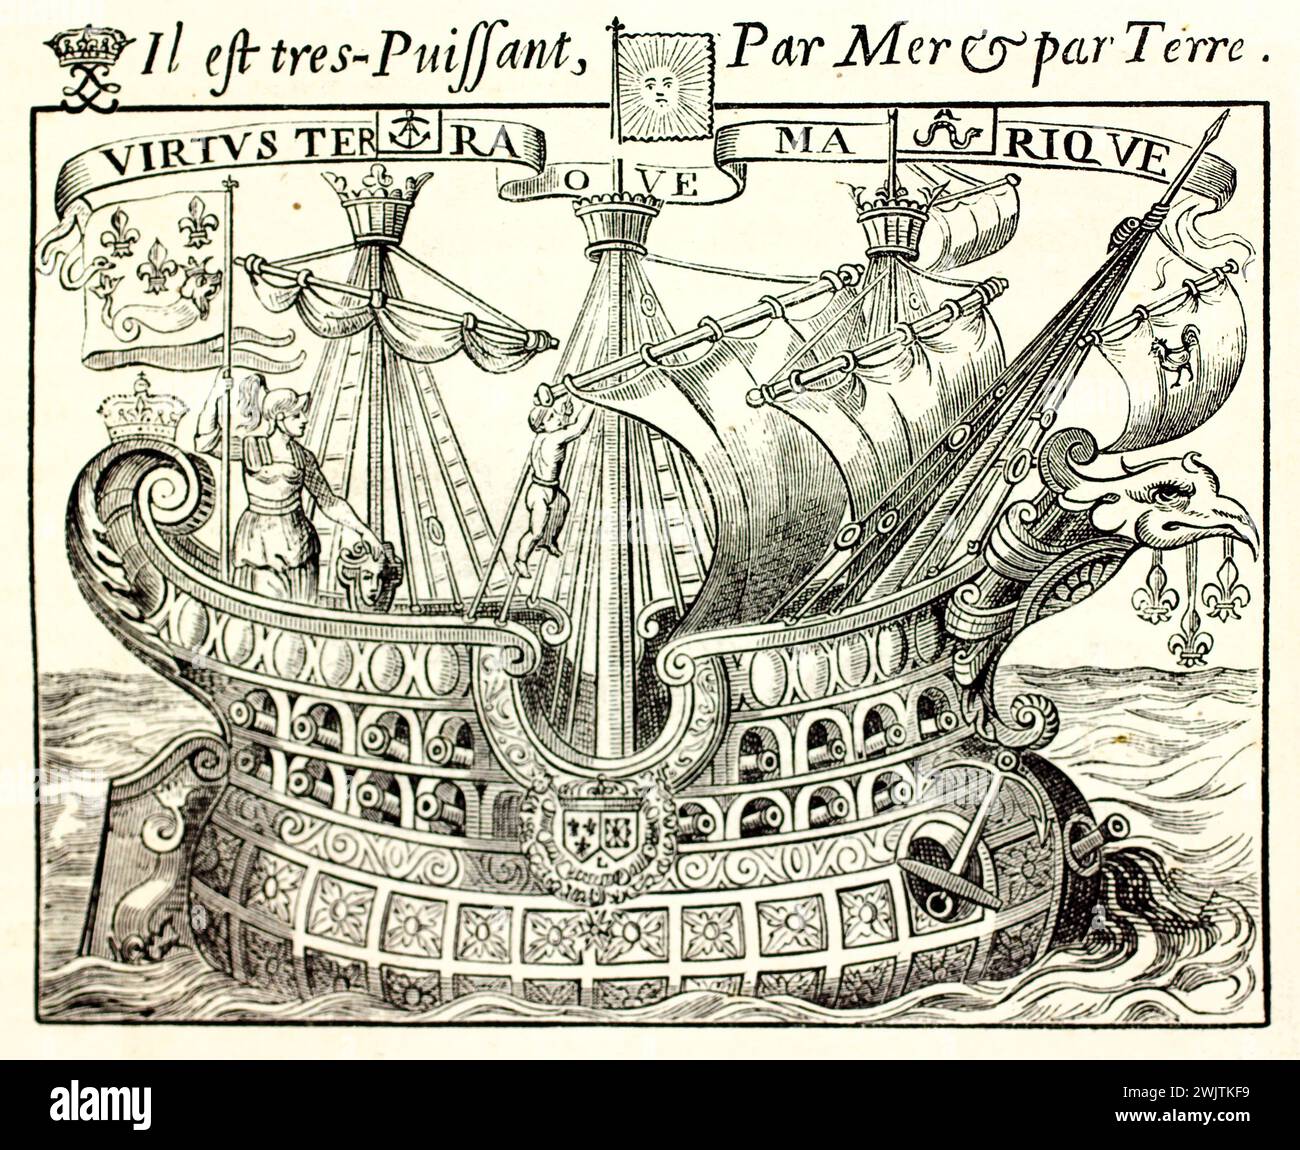 Old engraved illustration of the symbolic vessel of France. By unknown author, published on Magasin Pittoresque, Paris, 1852 Stock Photo